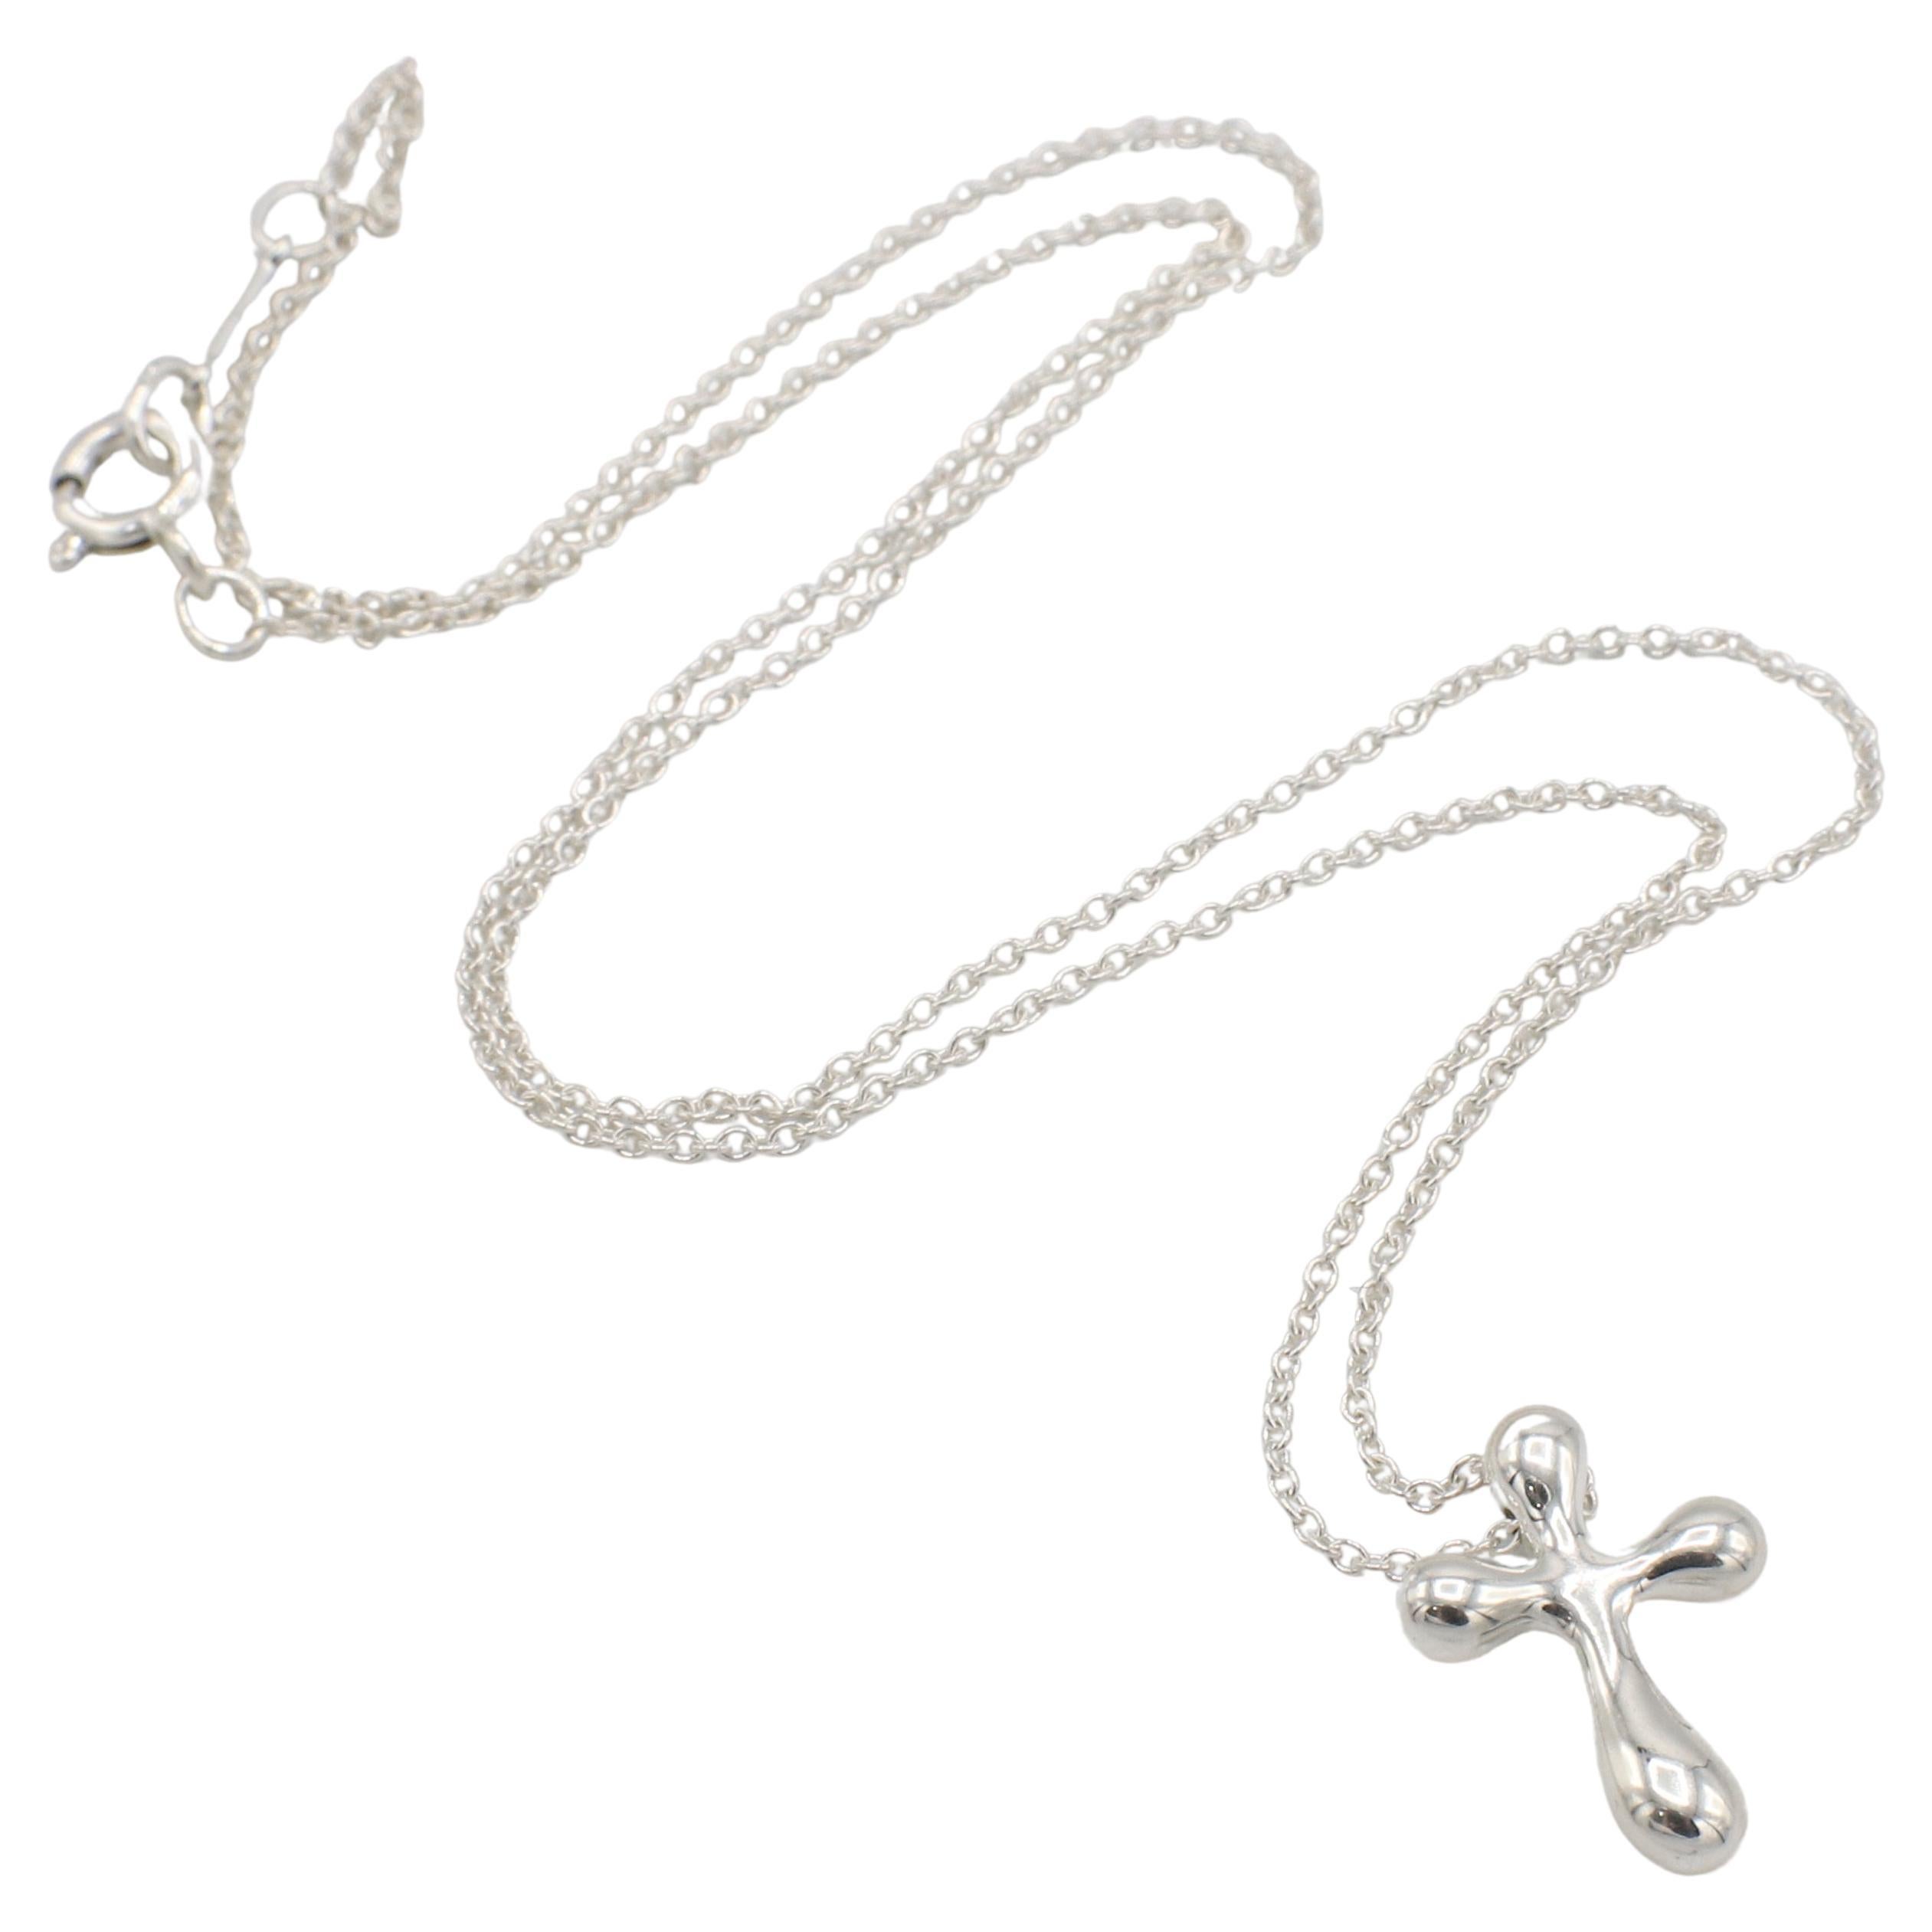 Tiffany & Co. Elsa Peretti Sterling Silver Cross Pendant Drop Necklace 
Metal: Sterling silver
Weight: 2.48 grams
Cross: 16 x 11.5mm 
Chain length: 16 inches
Signed: T&Co. 925 PERETTI